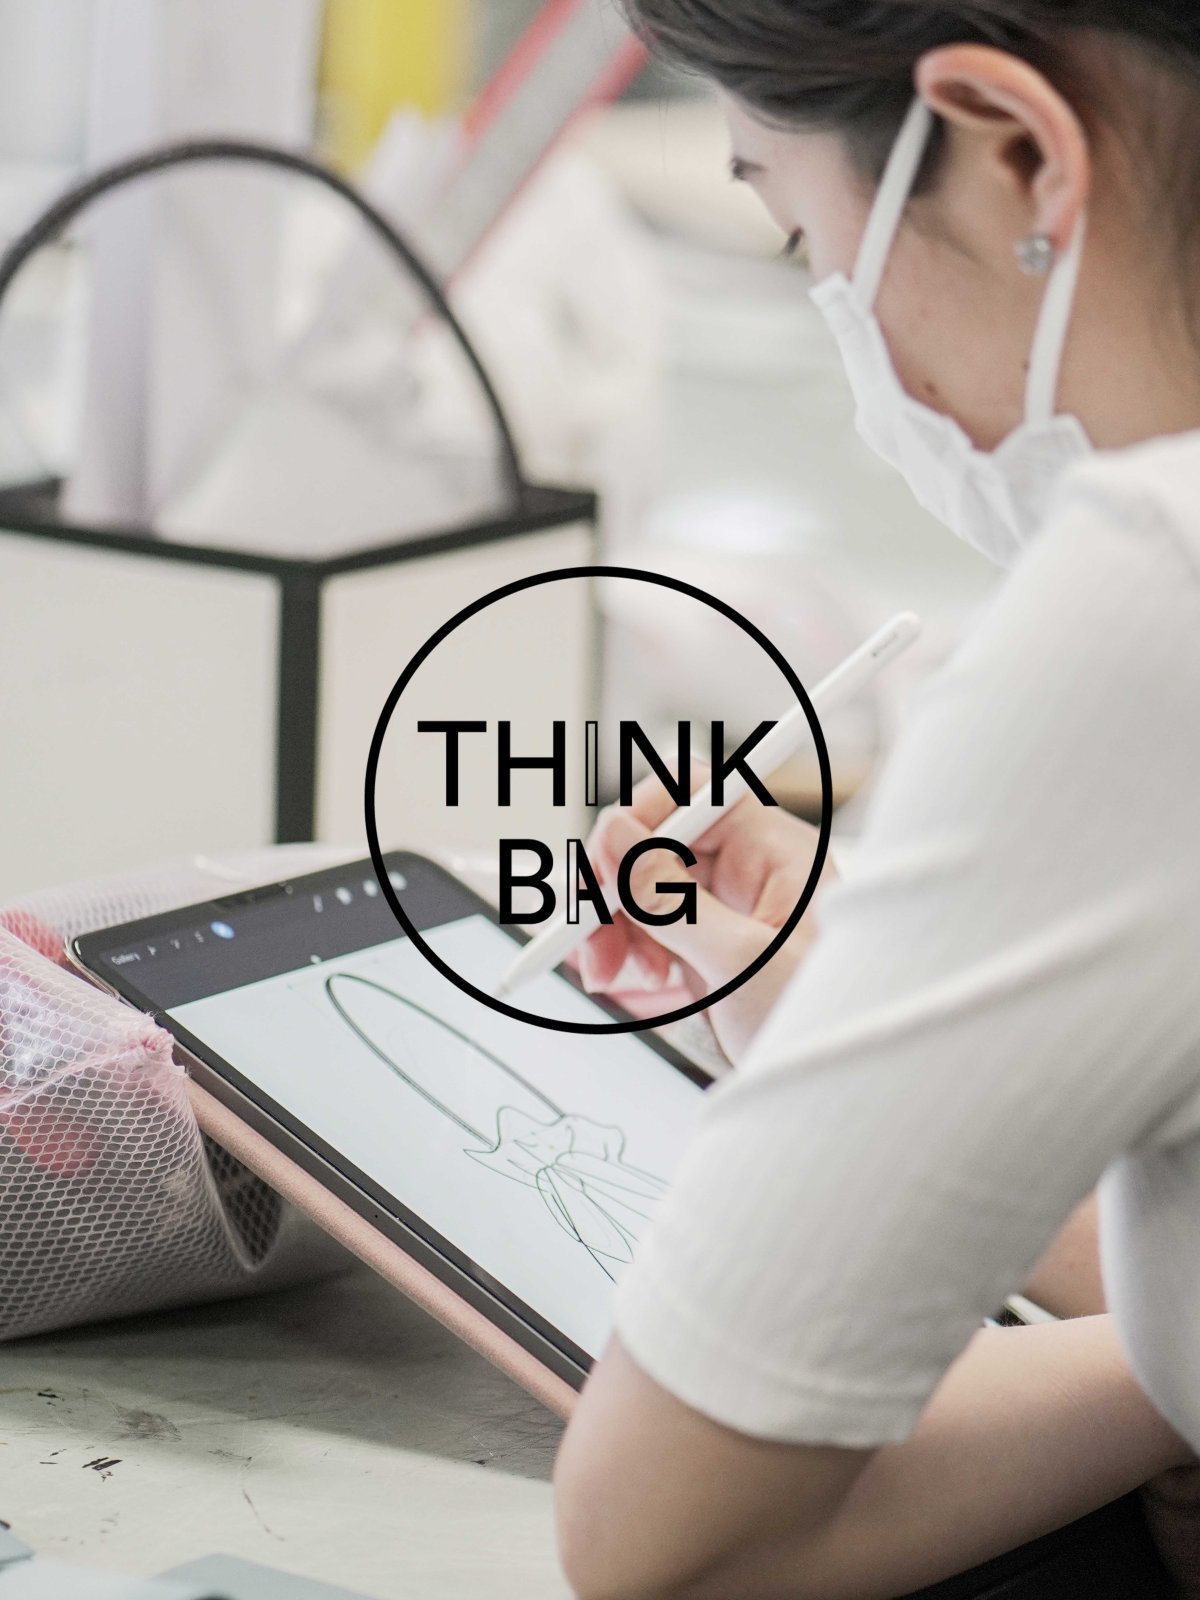 THINK BAG competition: the project of Leather & Luxury and Loipell in collaboration with the students of Polimoda reaches its third edition